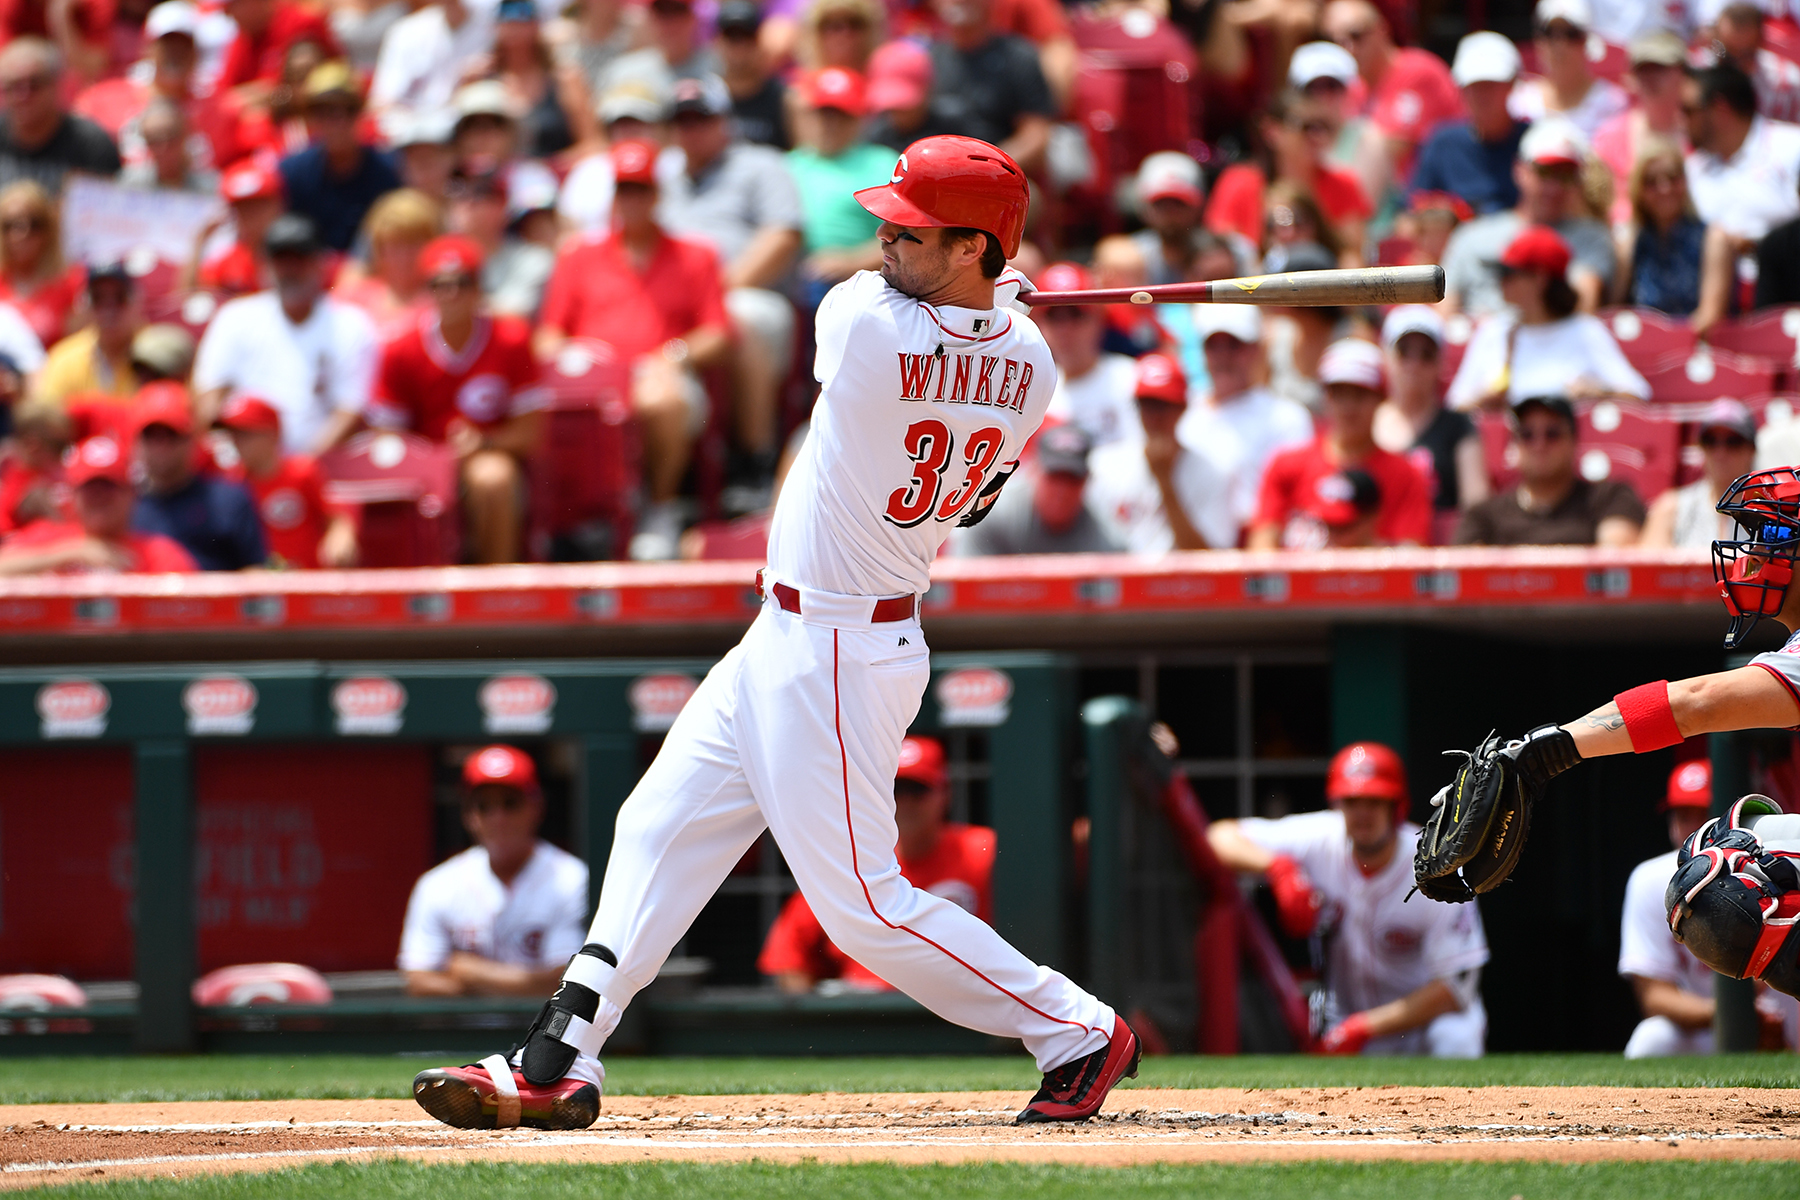 Jesse Winker was a candidate for Rookie of the Year before his season ended due to injury. Photo courtesy of the Cincinnati Reds